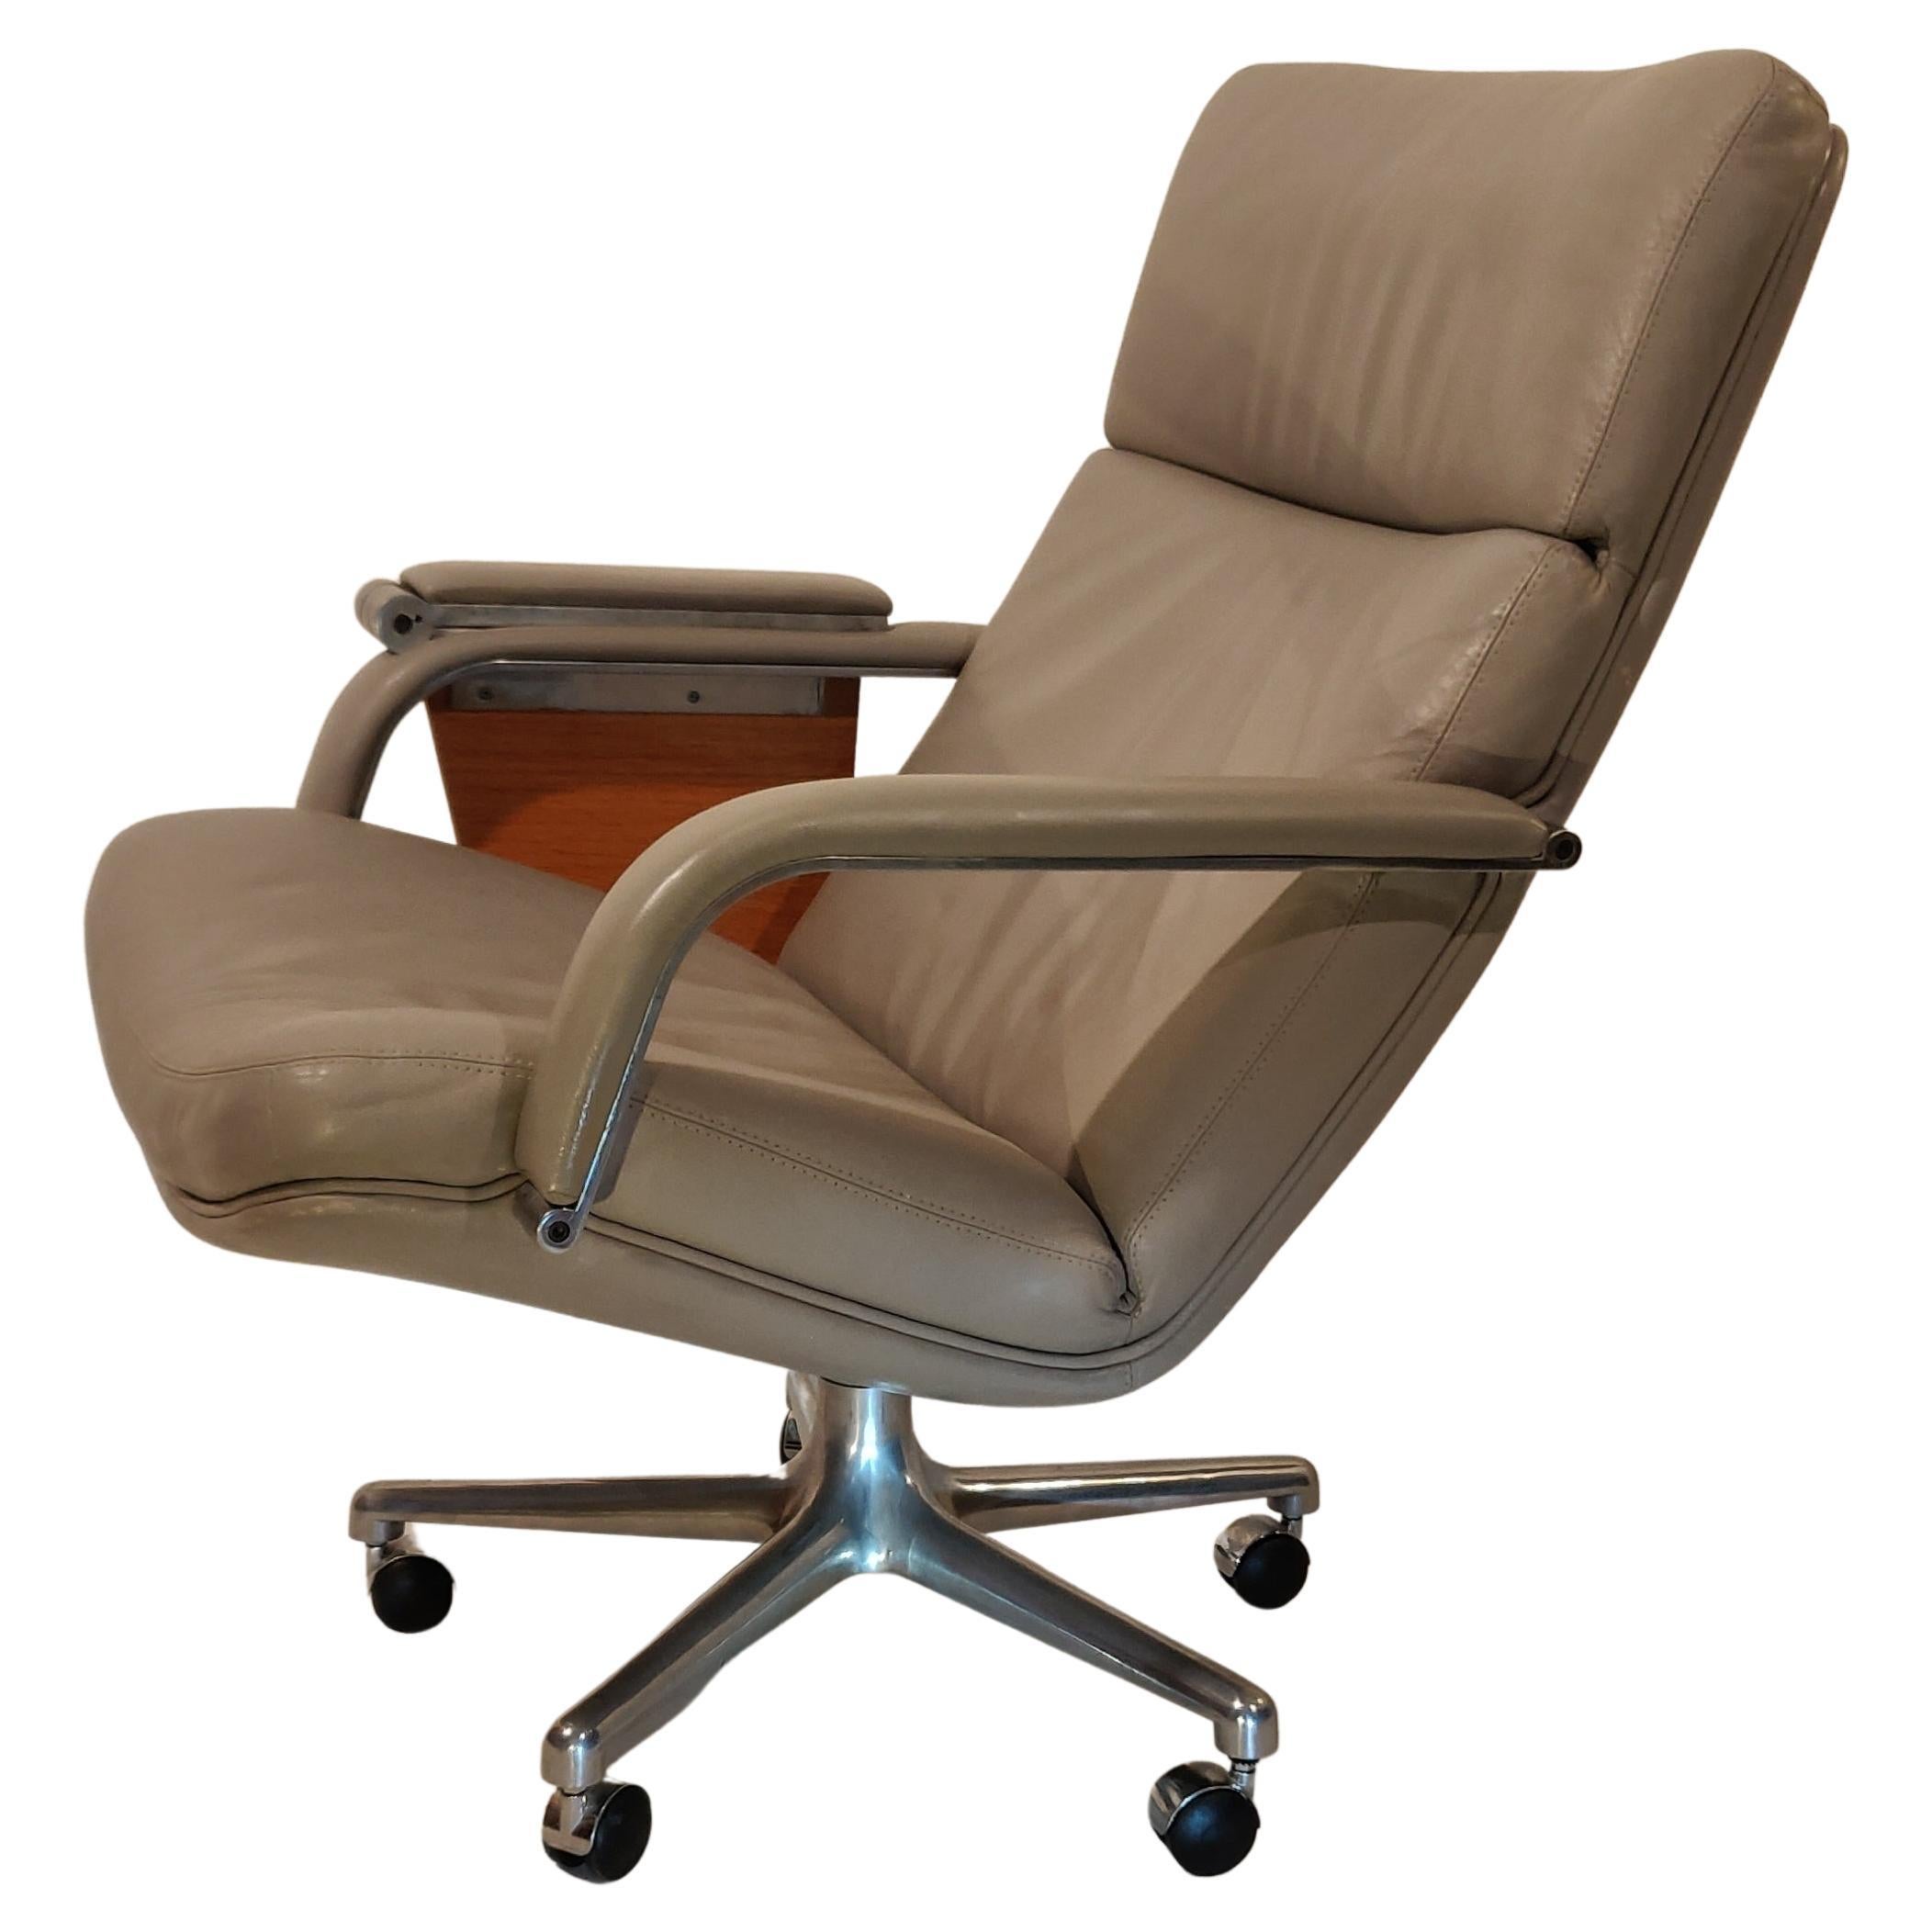 Special version of the easy swivelchair, type F141, designed by Geoffrey Harcourt for Artifort, 1970. Soft grey leather upholstery and aluminium 5-leg base on wheels. Especialy with an integrated extendable wooden writing board. Very good condition.